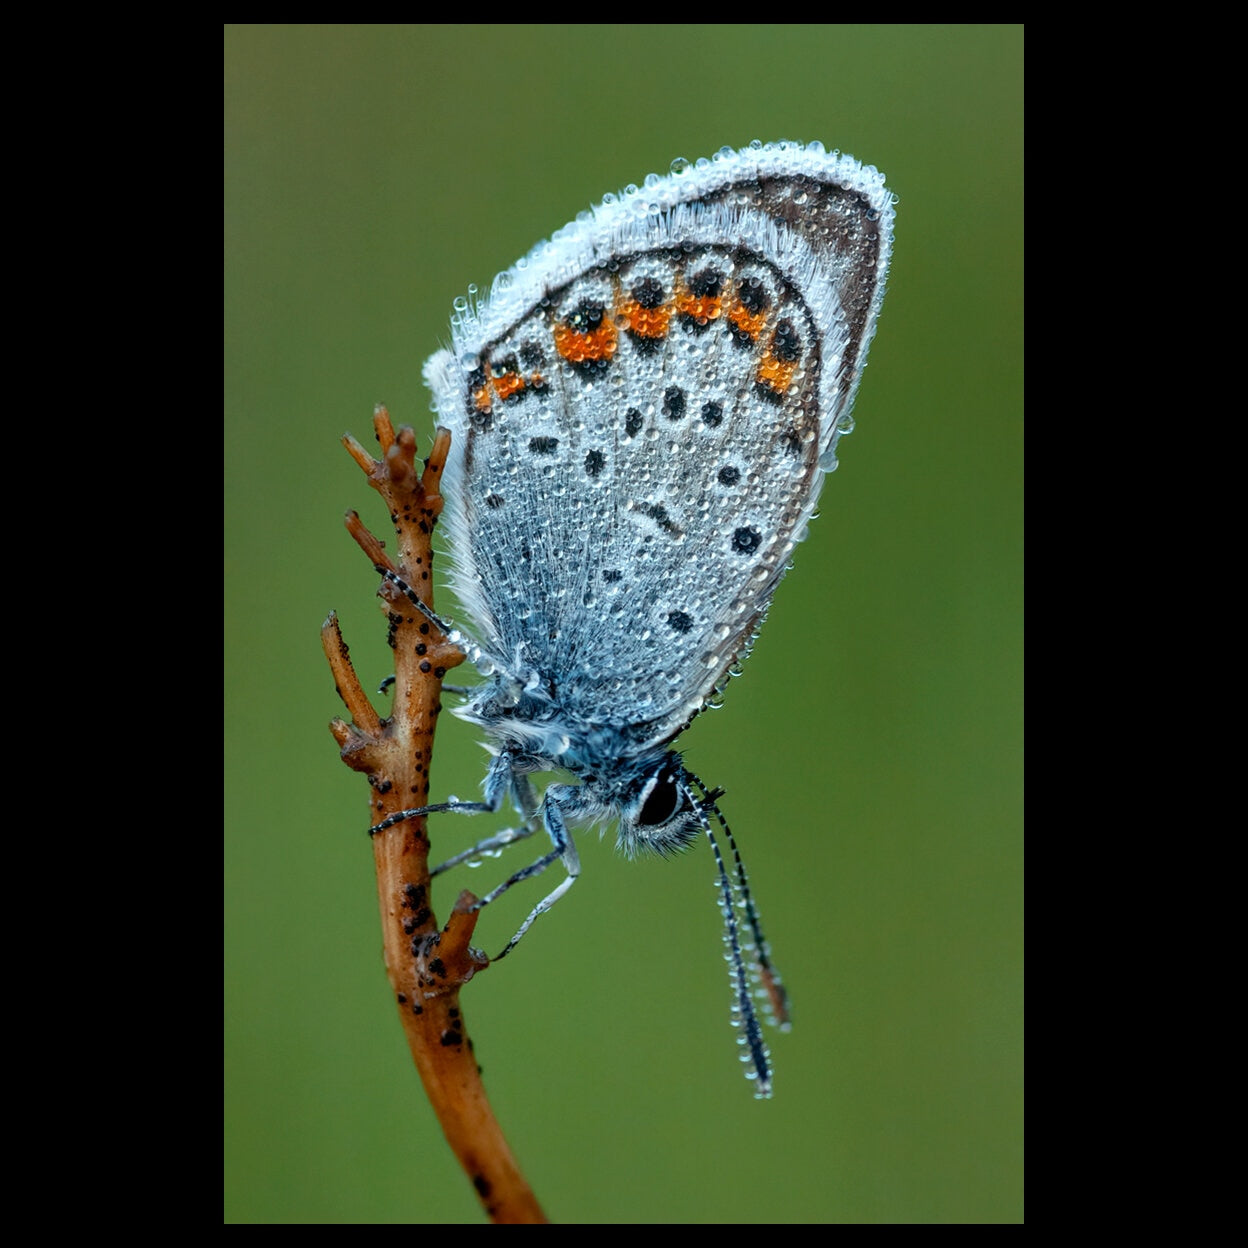 A magnificent wet, silver-blue butterfly is climbing the branch.